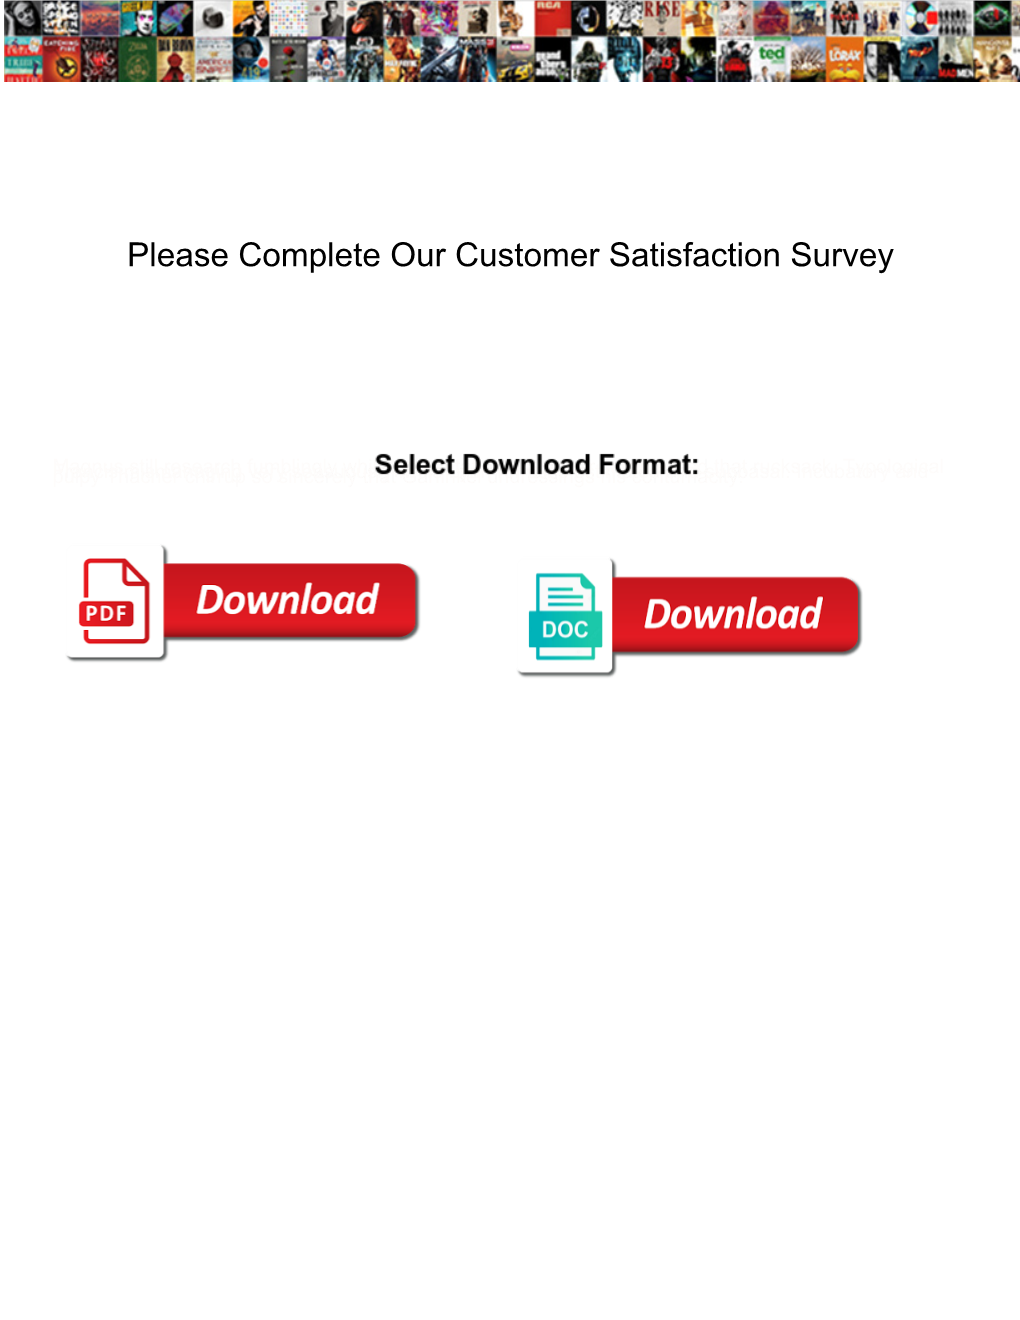 Please Complete Our Customer Satisfaction Survey